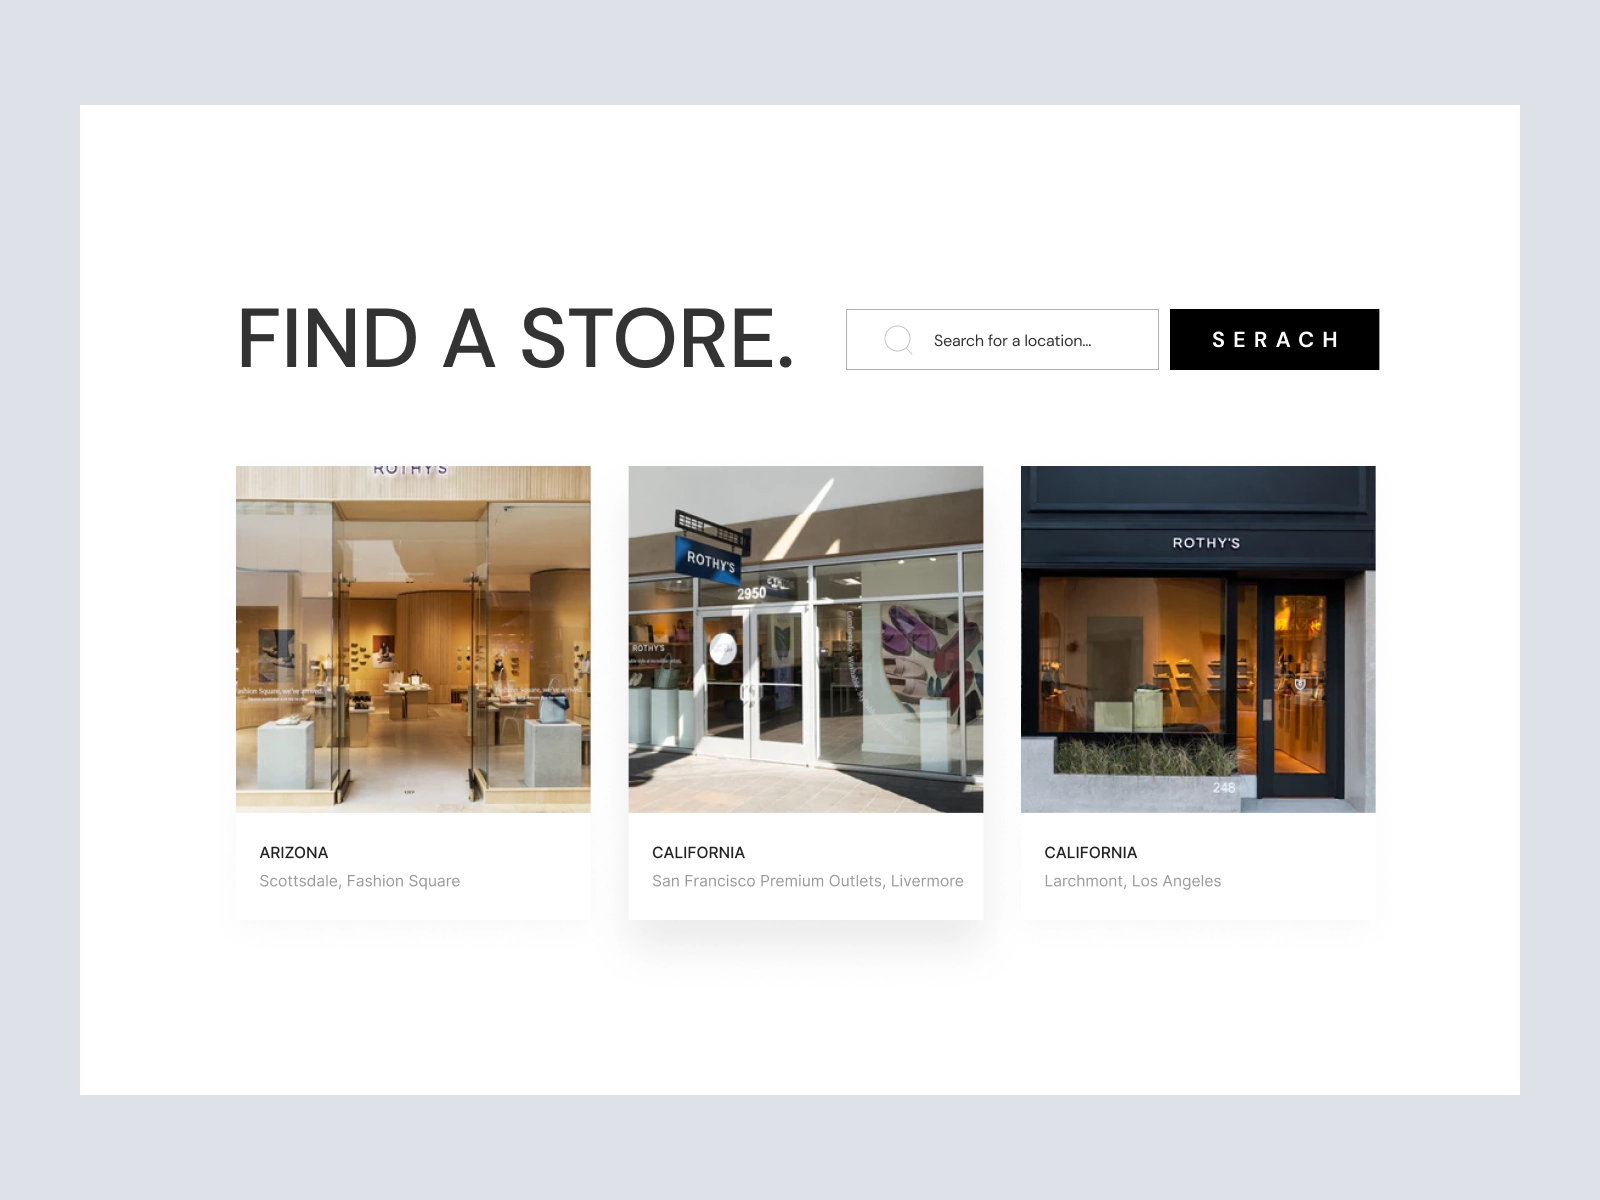 Rothy's - Women Fashion Store for Adobe XD - screen 5